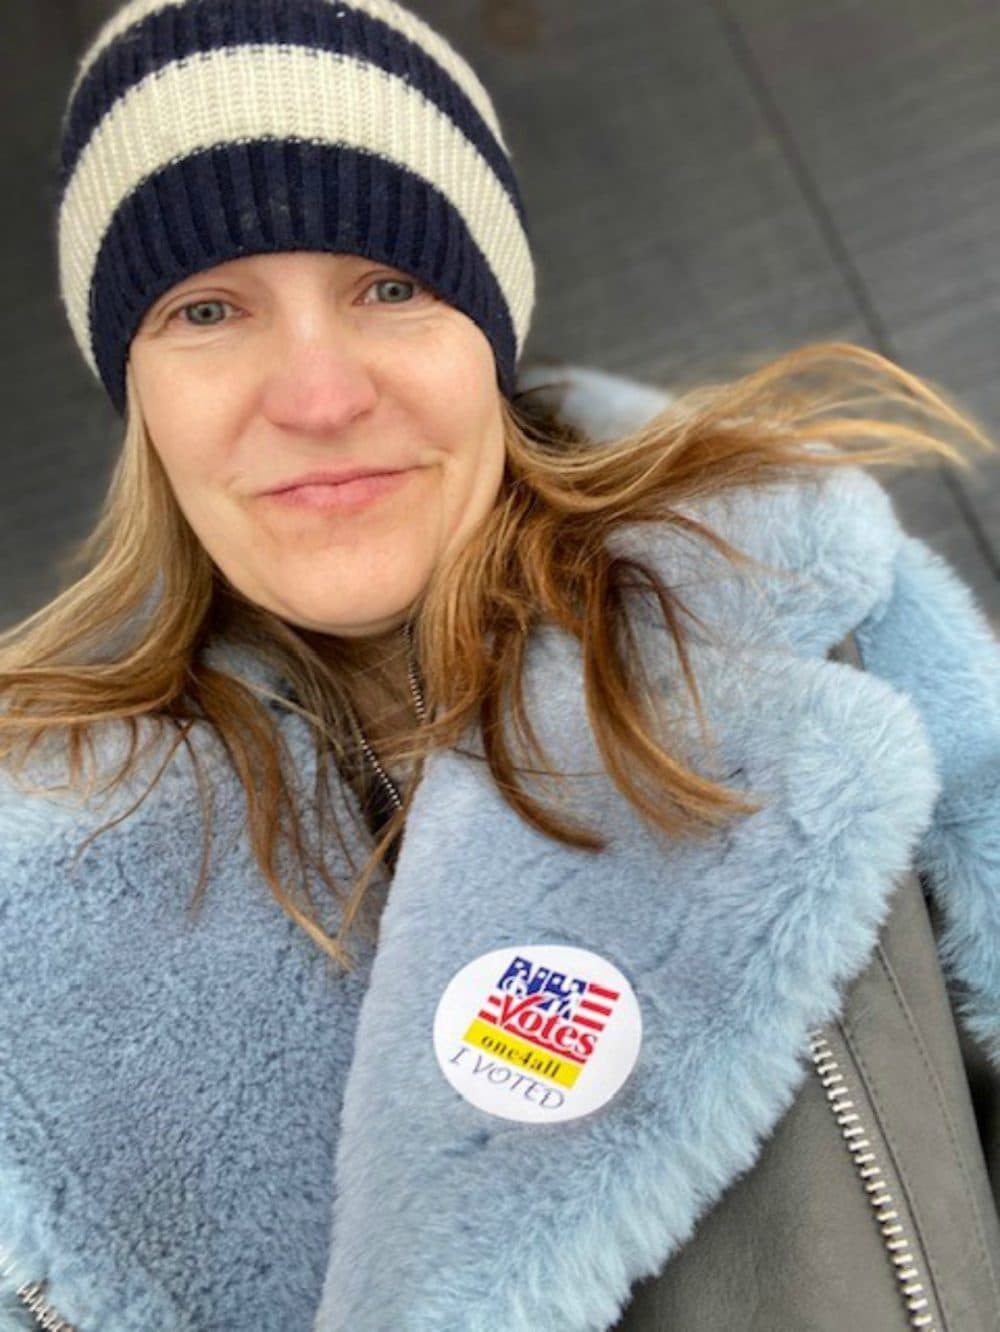 The author, after voting in the New Hampshire primary. (Courtesy)